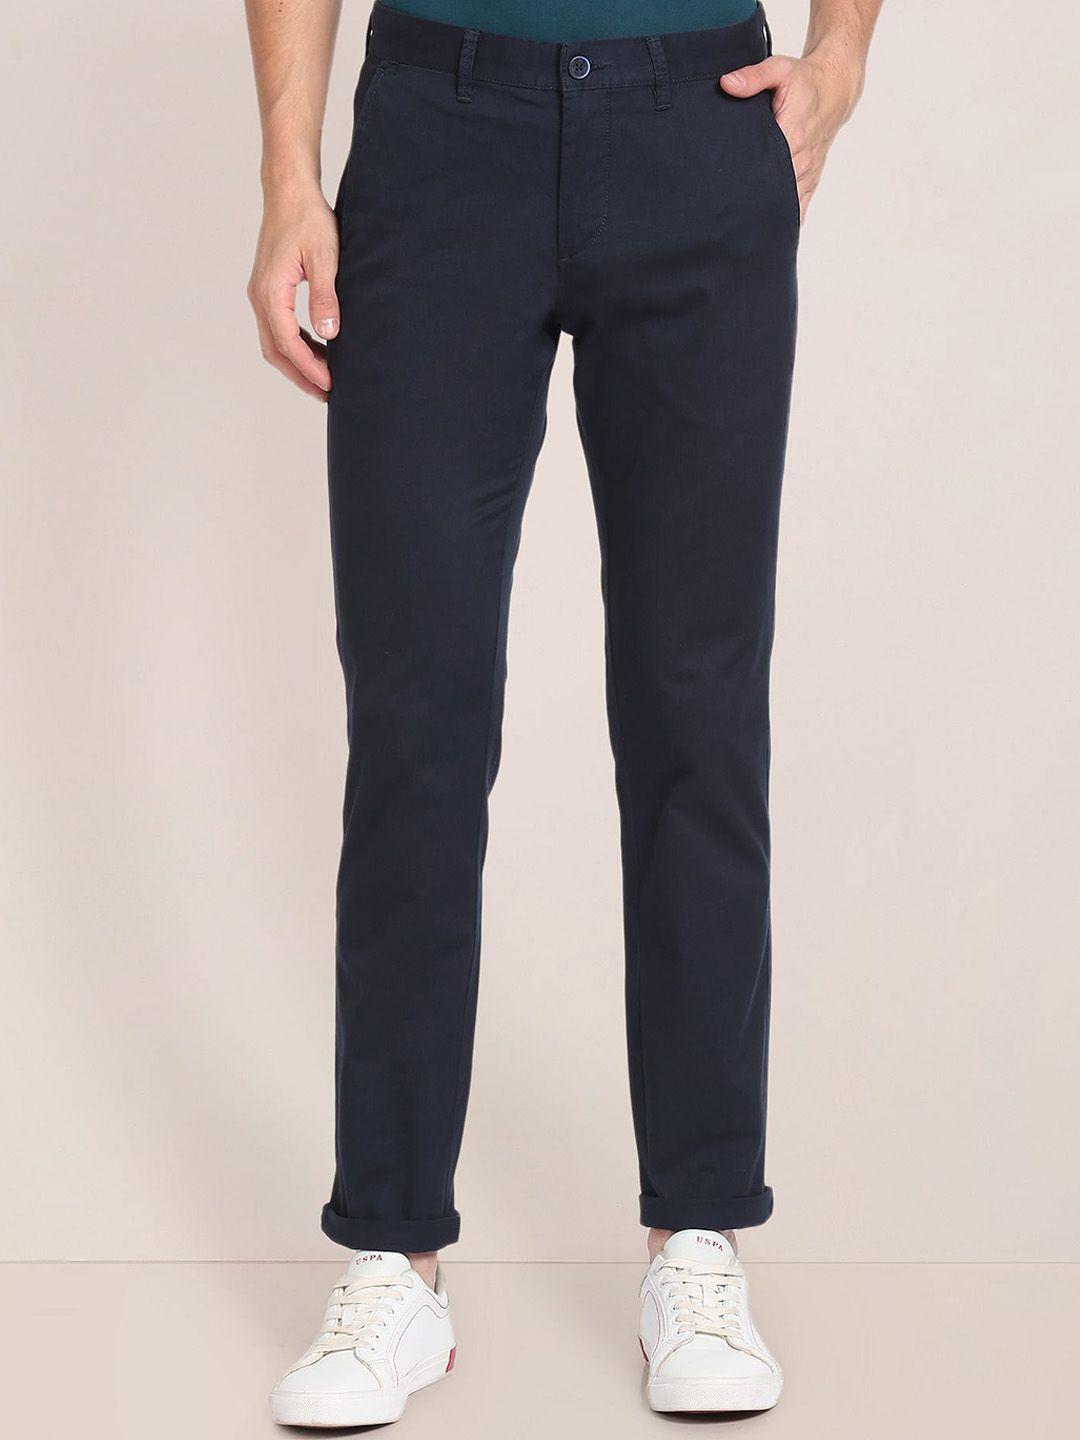 u s polo assn men blue straight fit trousers